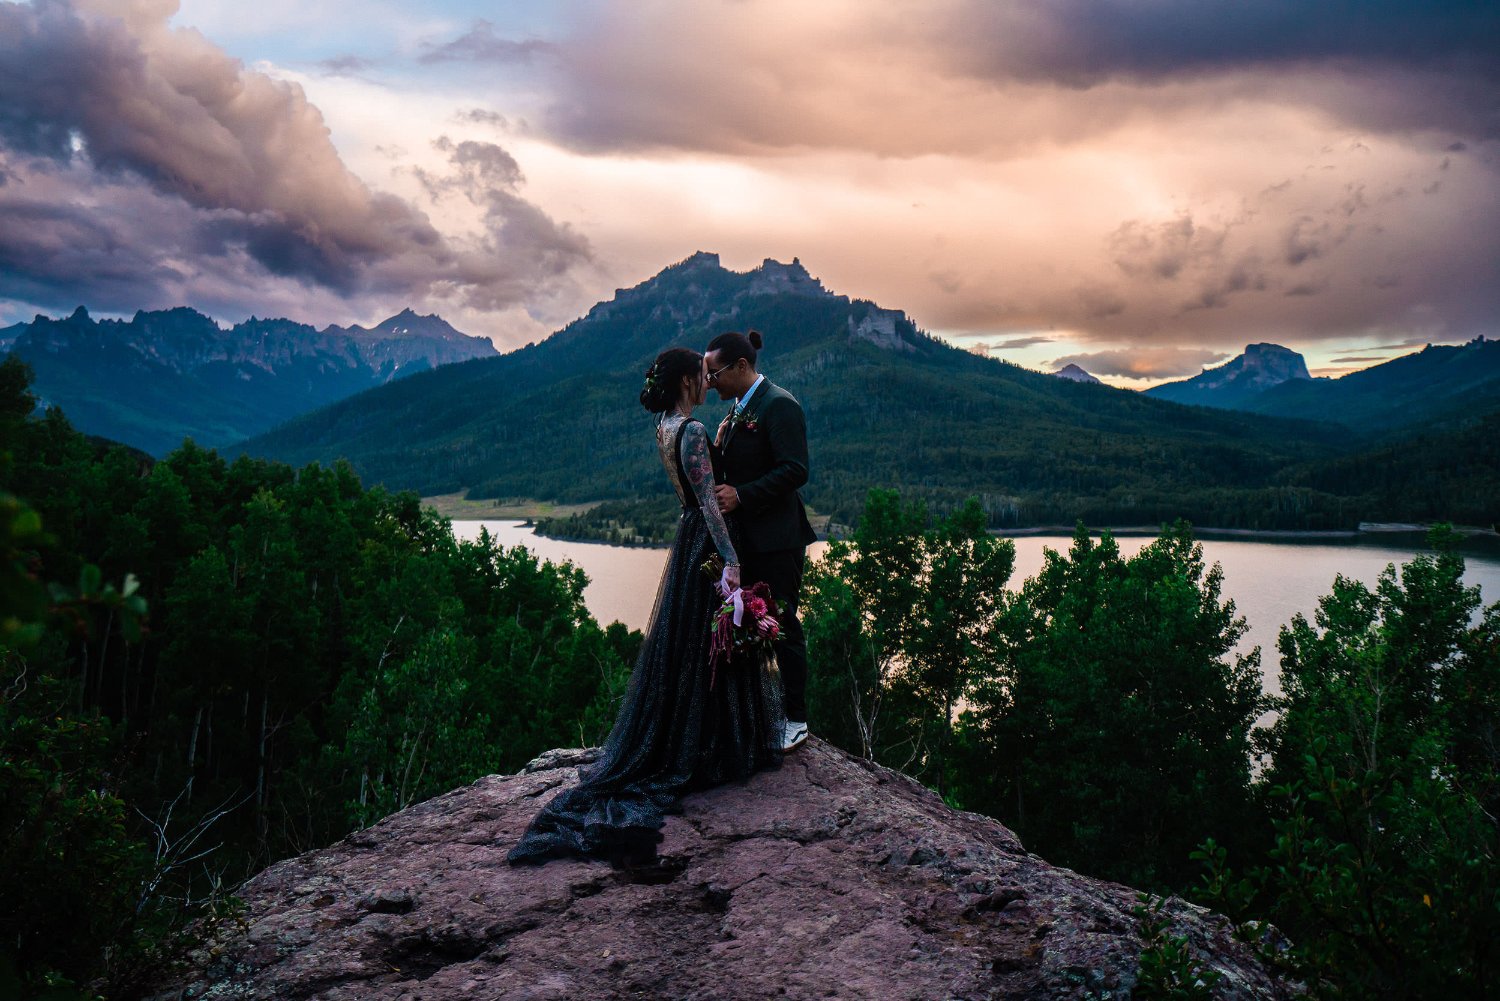 A blissful elopement photoshoot featuring a loving man and woman sharing a passionate kiss on a majestic rock amidst breathtaking mountains and tranquil water.